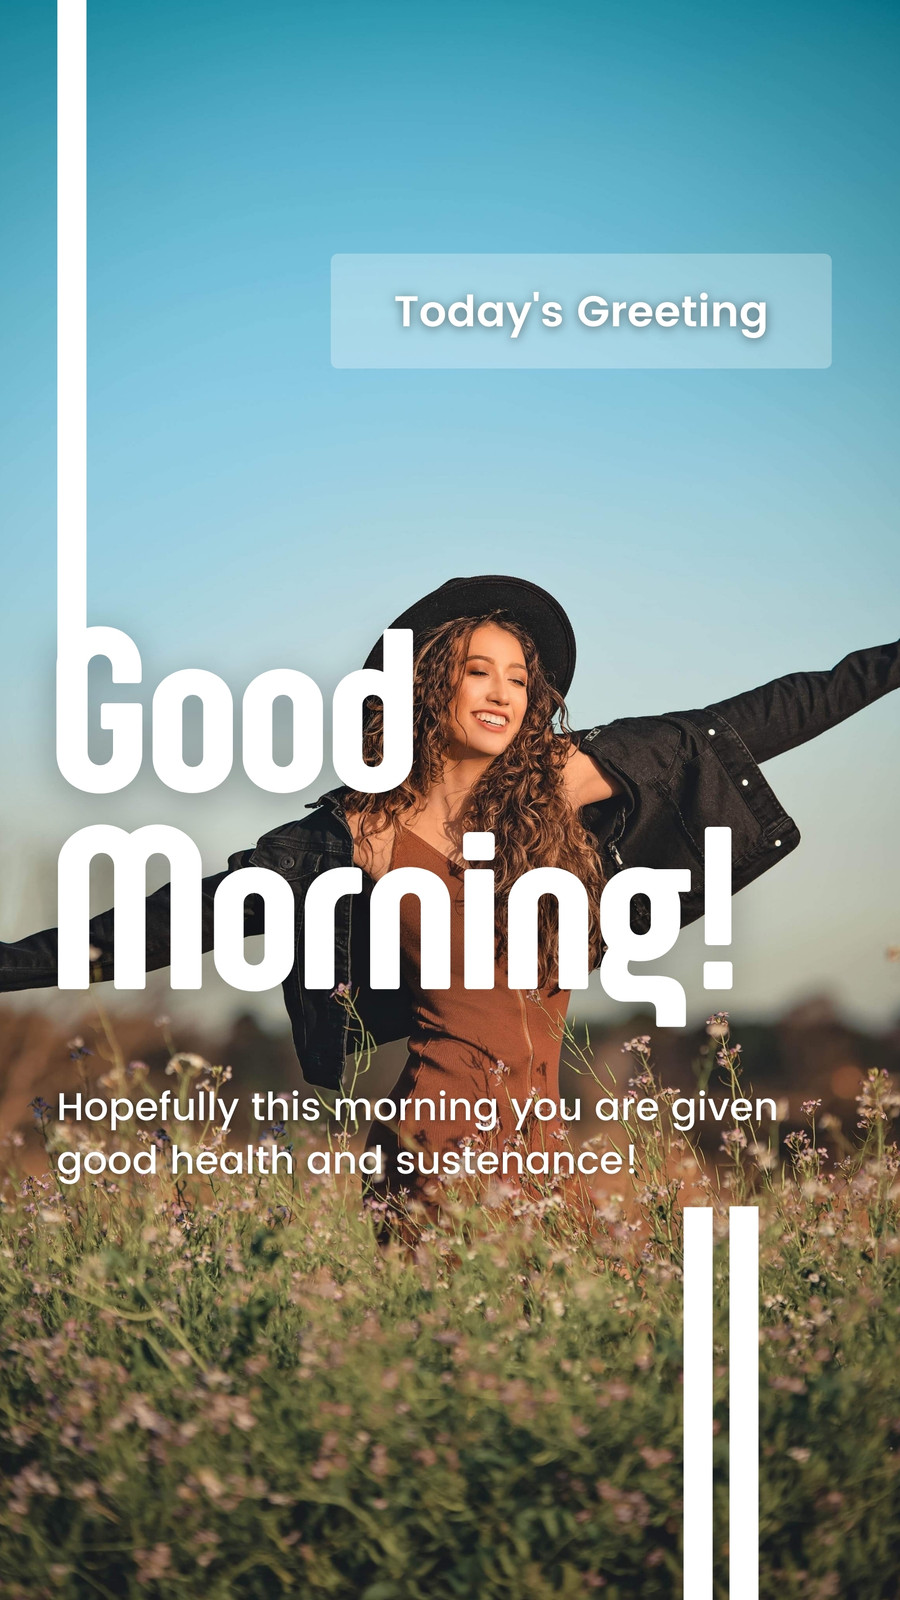 Page 16 - Free and customizable good morning wallpaper templates